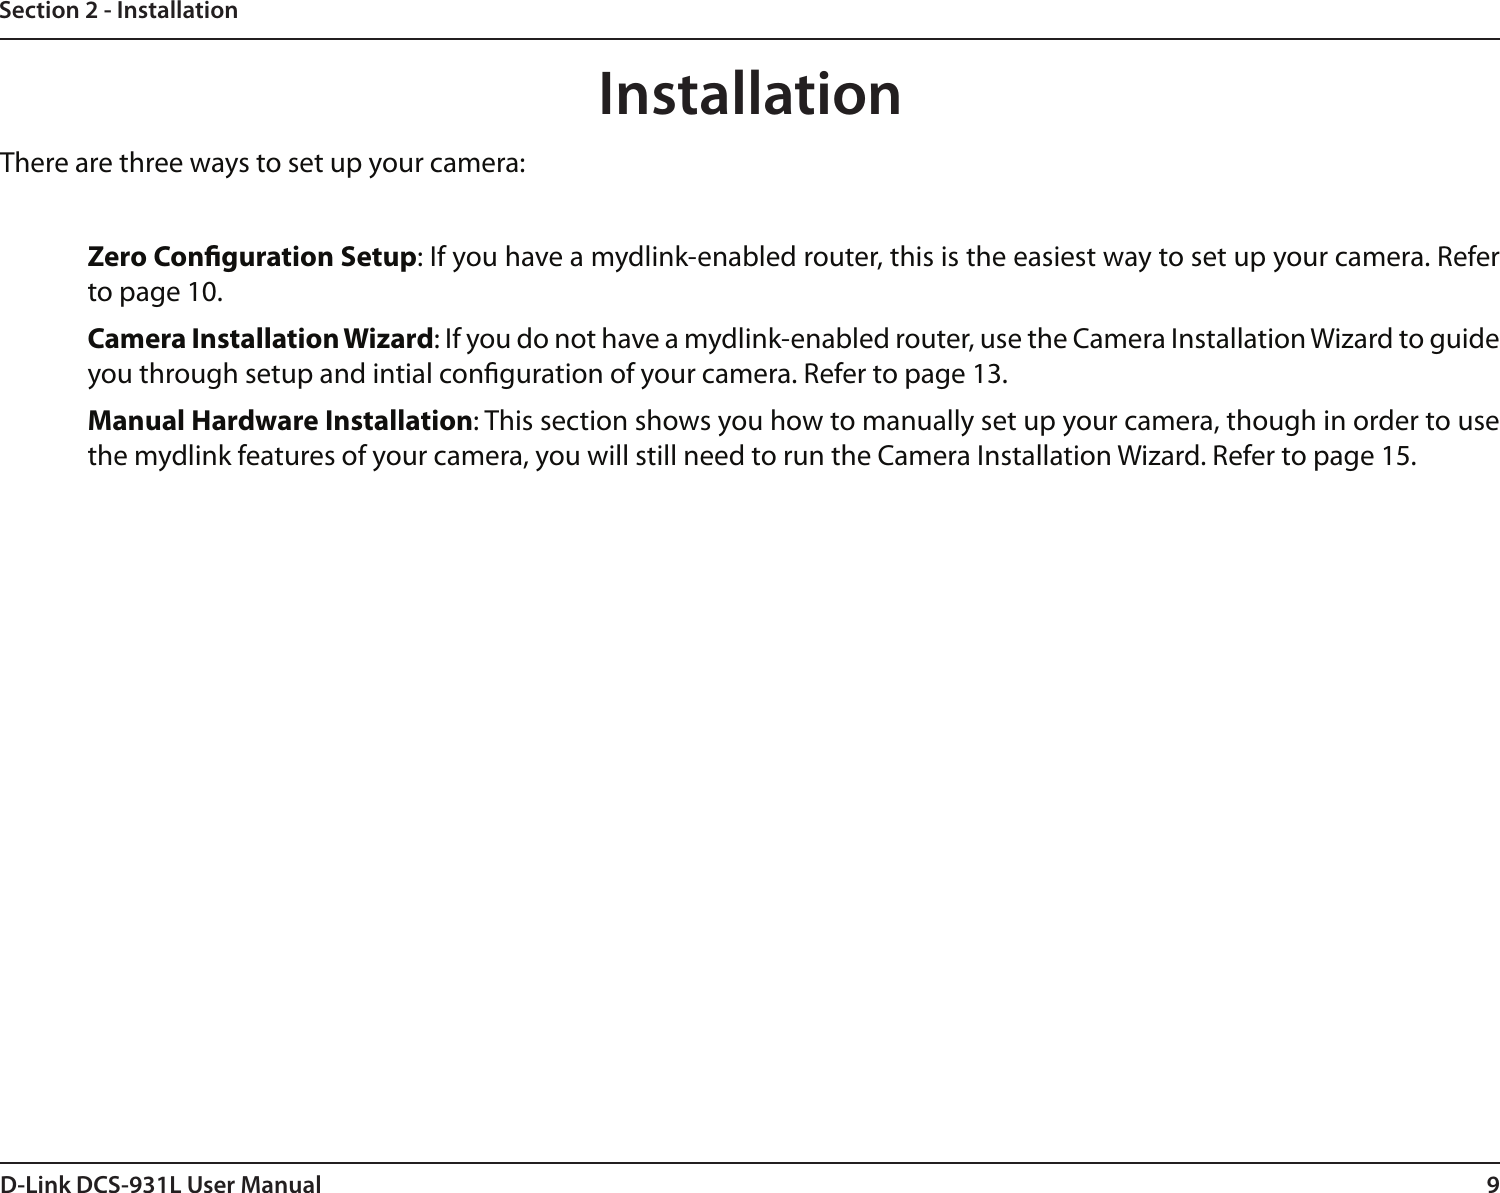 9D-Link DCS-931L User ManualSection 2 - InstallationThere are three ways to set up your camera:Zero Conguration Setup: If you have a mydlink-enabled router, this is the easiest way to set up your camera. Refer to page 10.Camera Installation Wizard: If you do not have a mydlink-enabled router, use the Camera Installation Wizard to guide you through setup and intial conguration of your camera. Refer to page 13.Manual Hardware Installation: This section shows you how to manually set up your camera, though in order to use the mydlink features of your camera, you will still need to run the Camera Installation Wizard. Refer to page 15.Installation